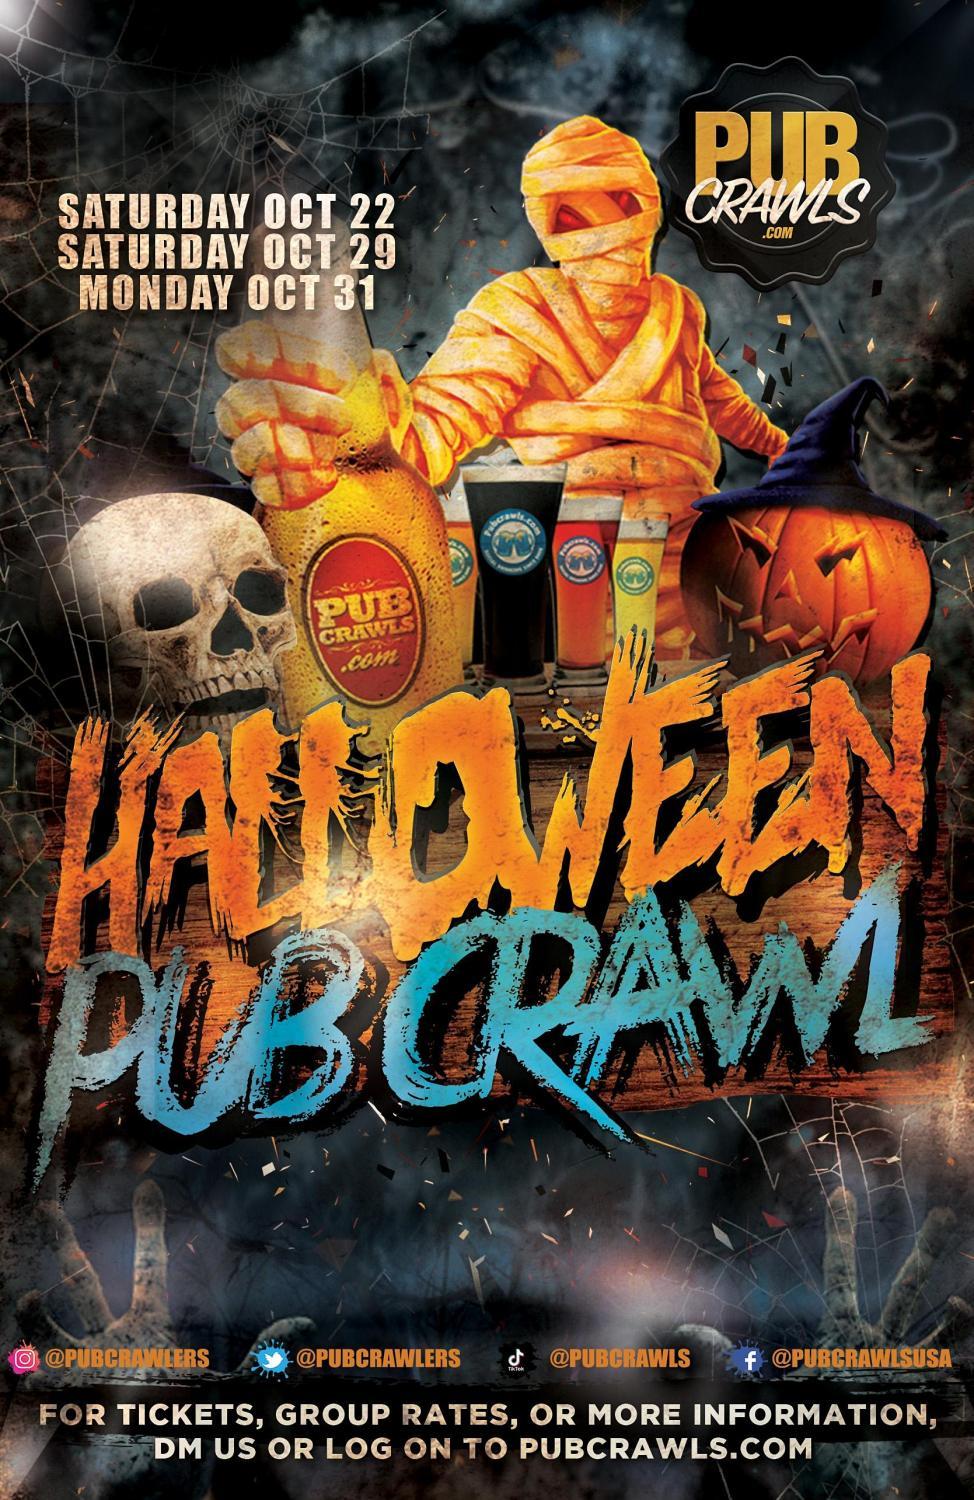 Tallahassee Happy Hour Halloweekend Bar Crawl
Sat Oct 22, 1:00 PM - Sat Oct 22, 8:00 PM
in 2 days